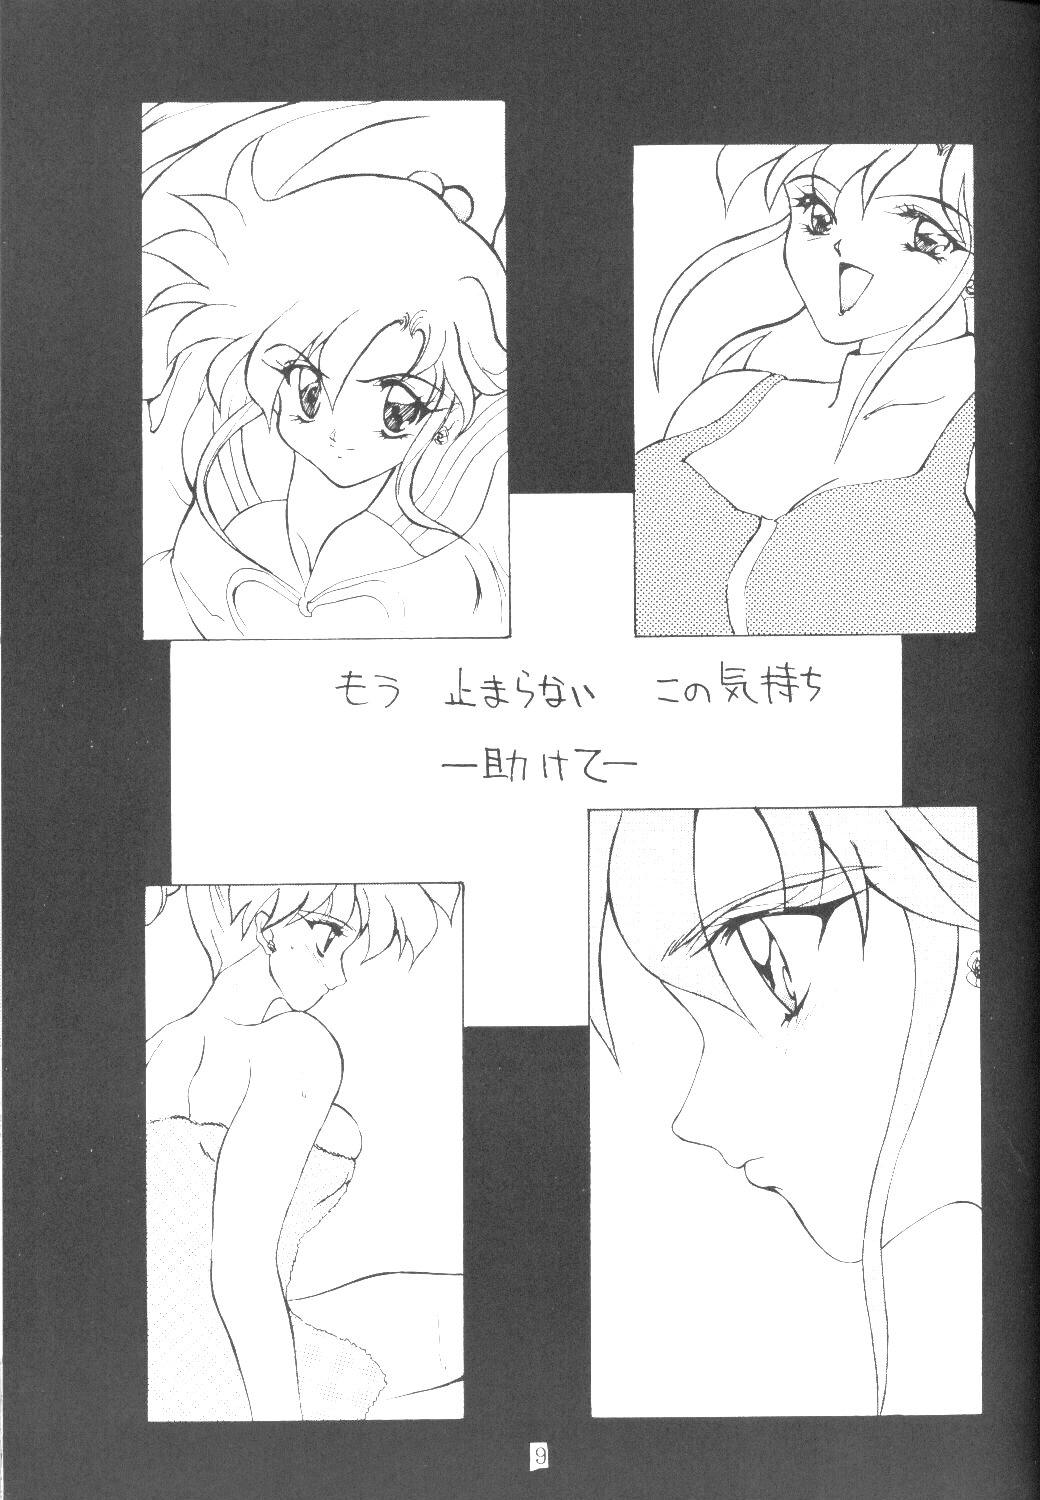 Fuck For Cash ALIVE AMI LOST - Sailor moon Fat Ass - Page 8